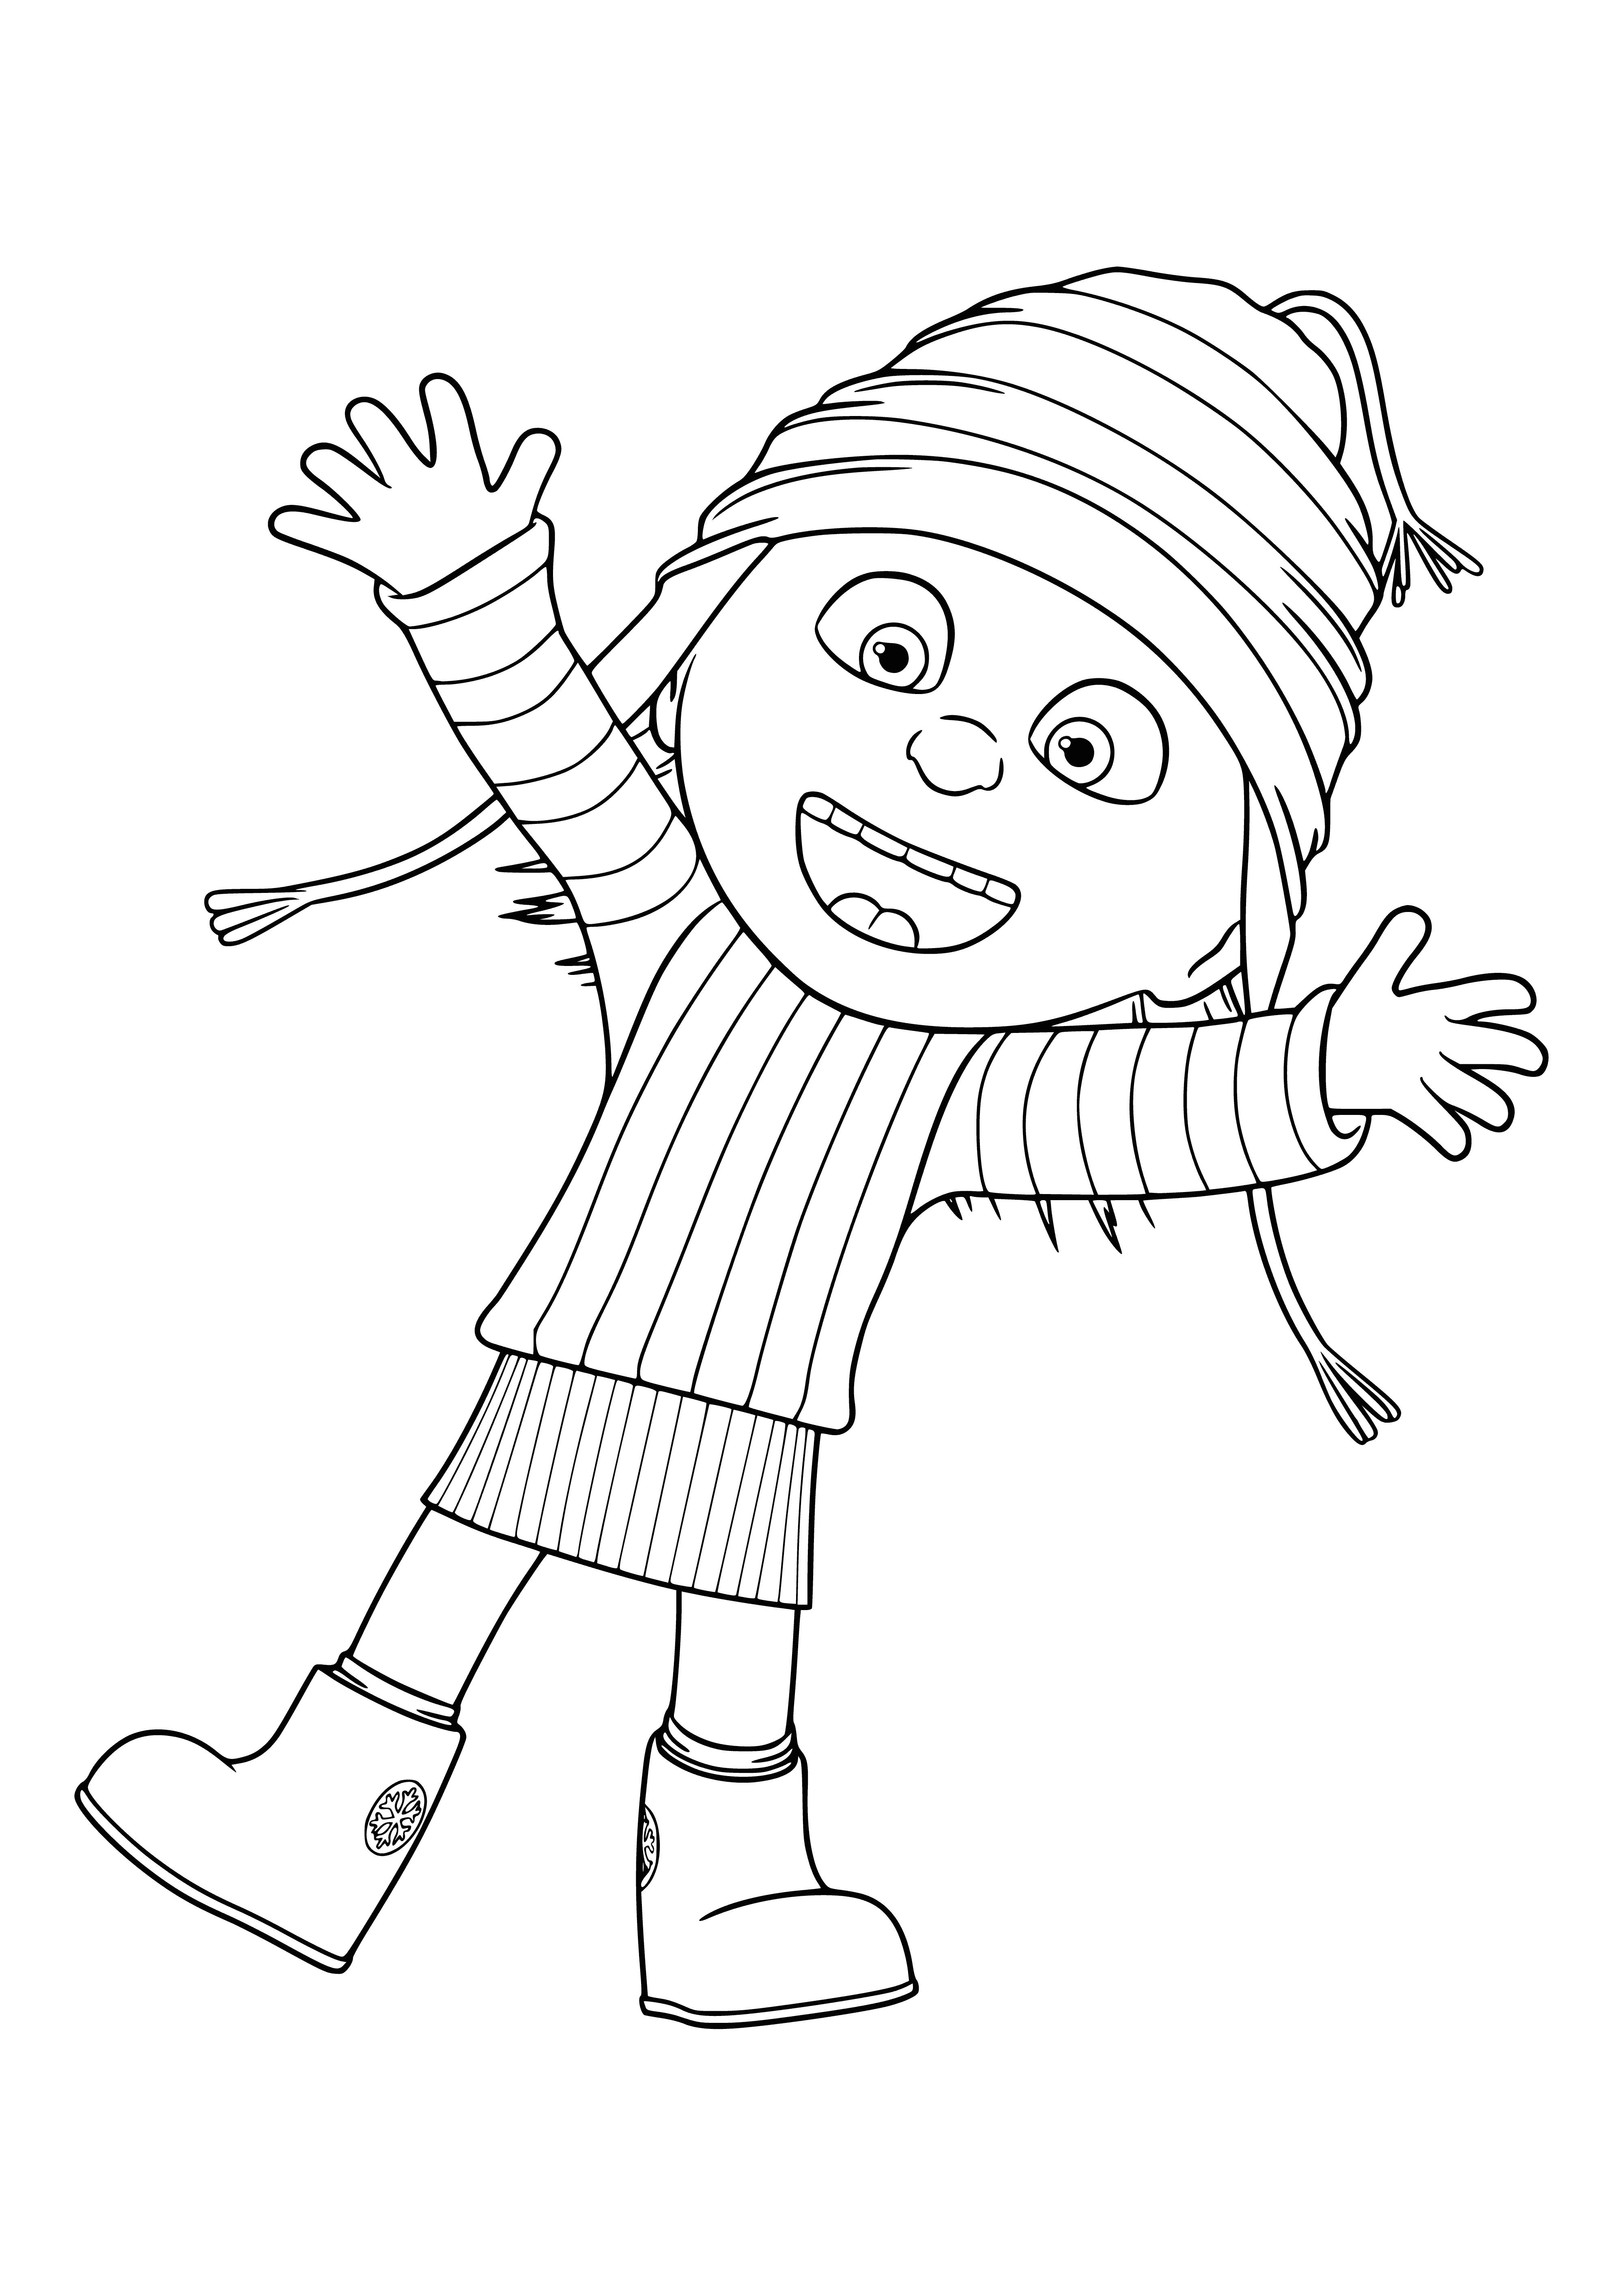 coloring page: Coloring pages featuring Despicable Me's Edith in outdoor, cartwheel, and reading poses. She wears a pink dress and has freckles and pigtails.